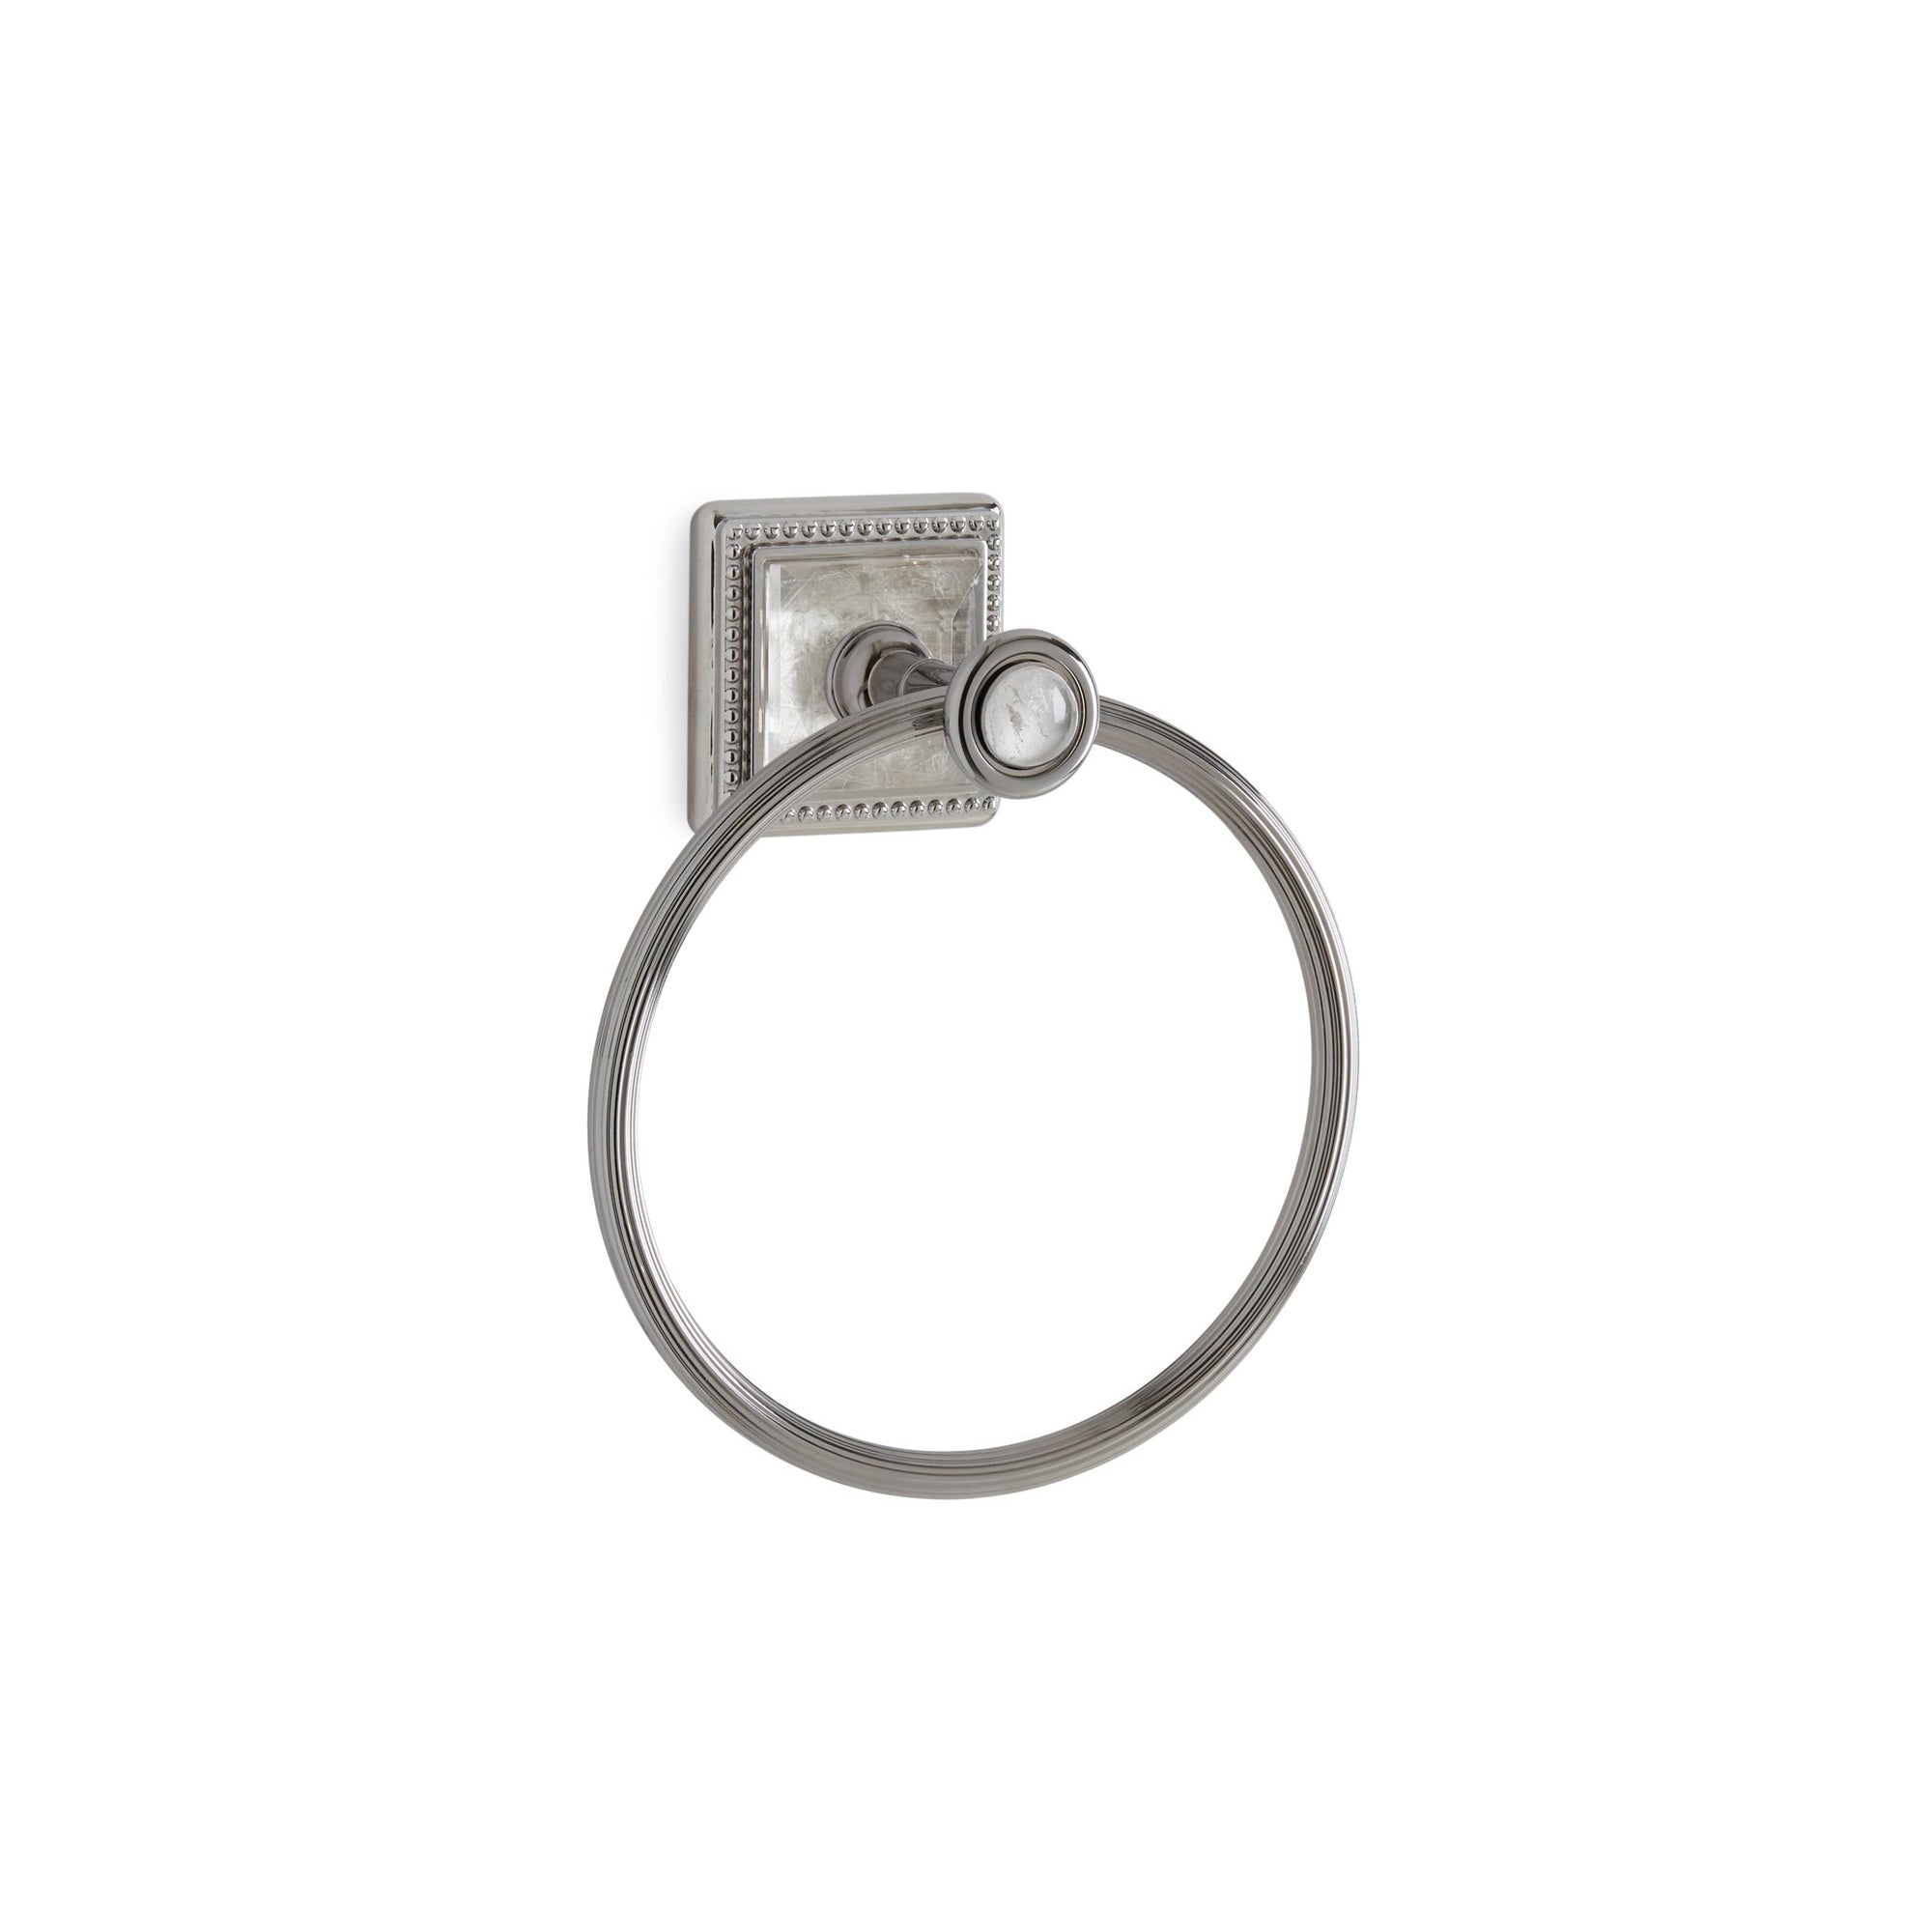 3401-P-RKCR-CP Sherle Wagner International The Semiprecious Pyramid Towel Ring in Polished Chrome metal finish